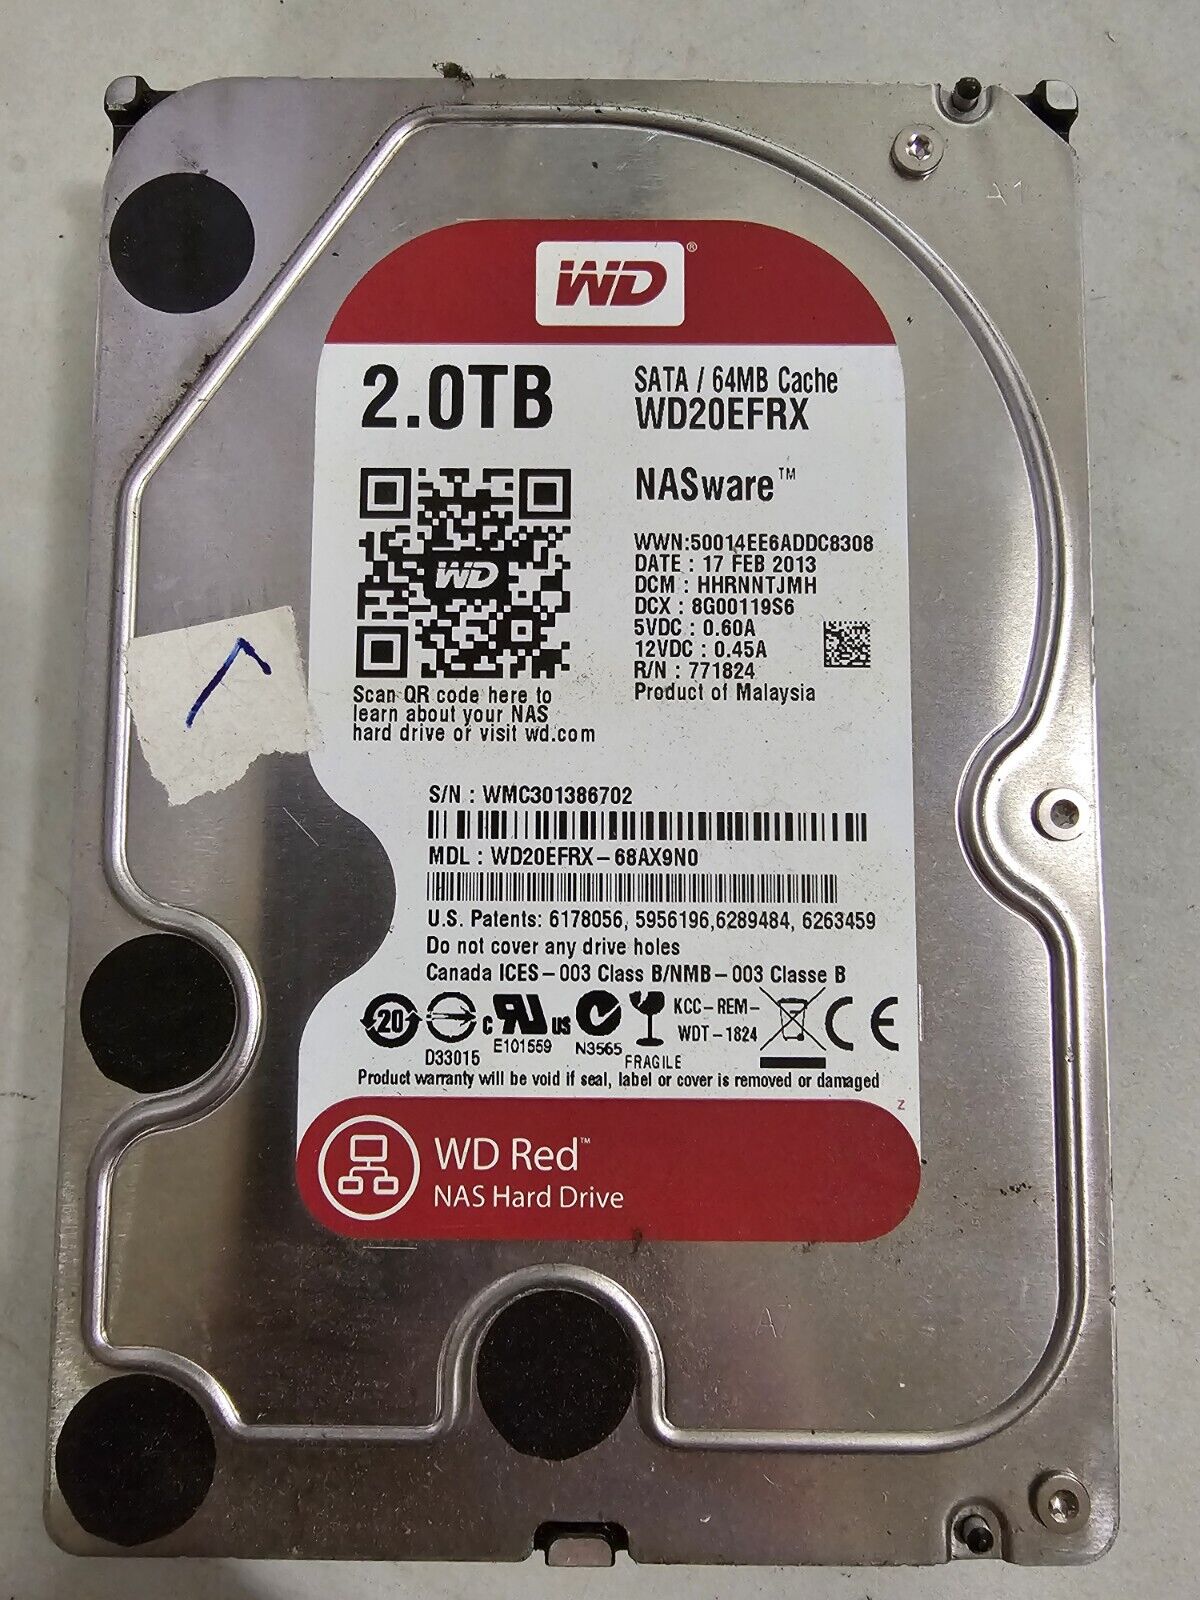 Western Digital WD Red 2.0TB NASware Hard Drive (WD20EFRX) Tested and Works